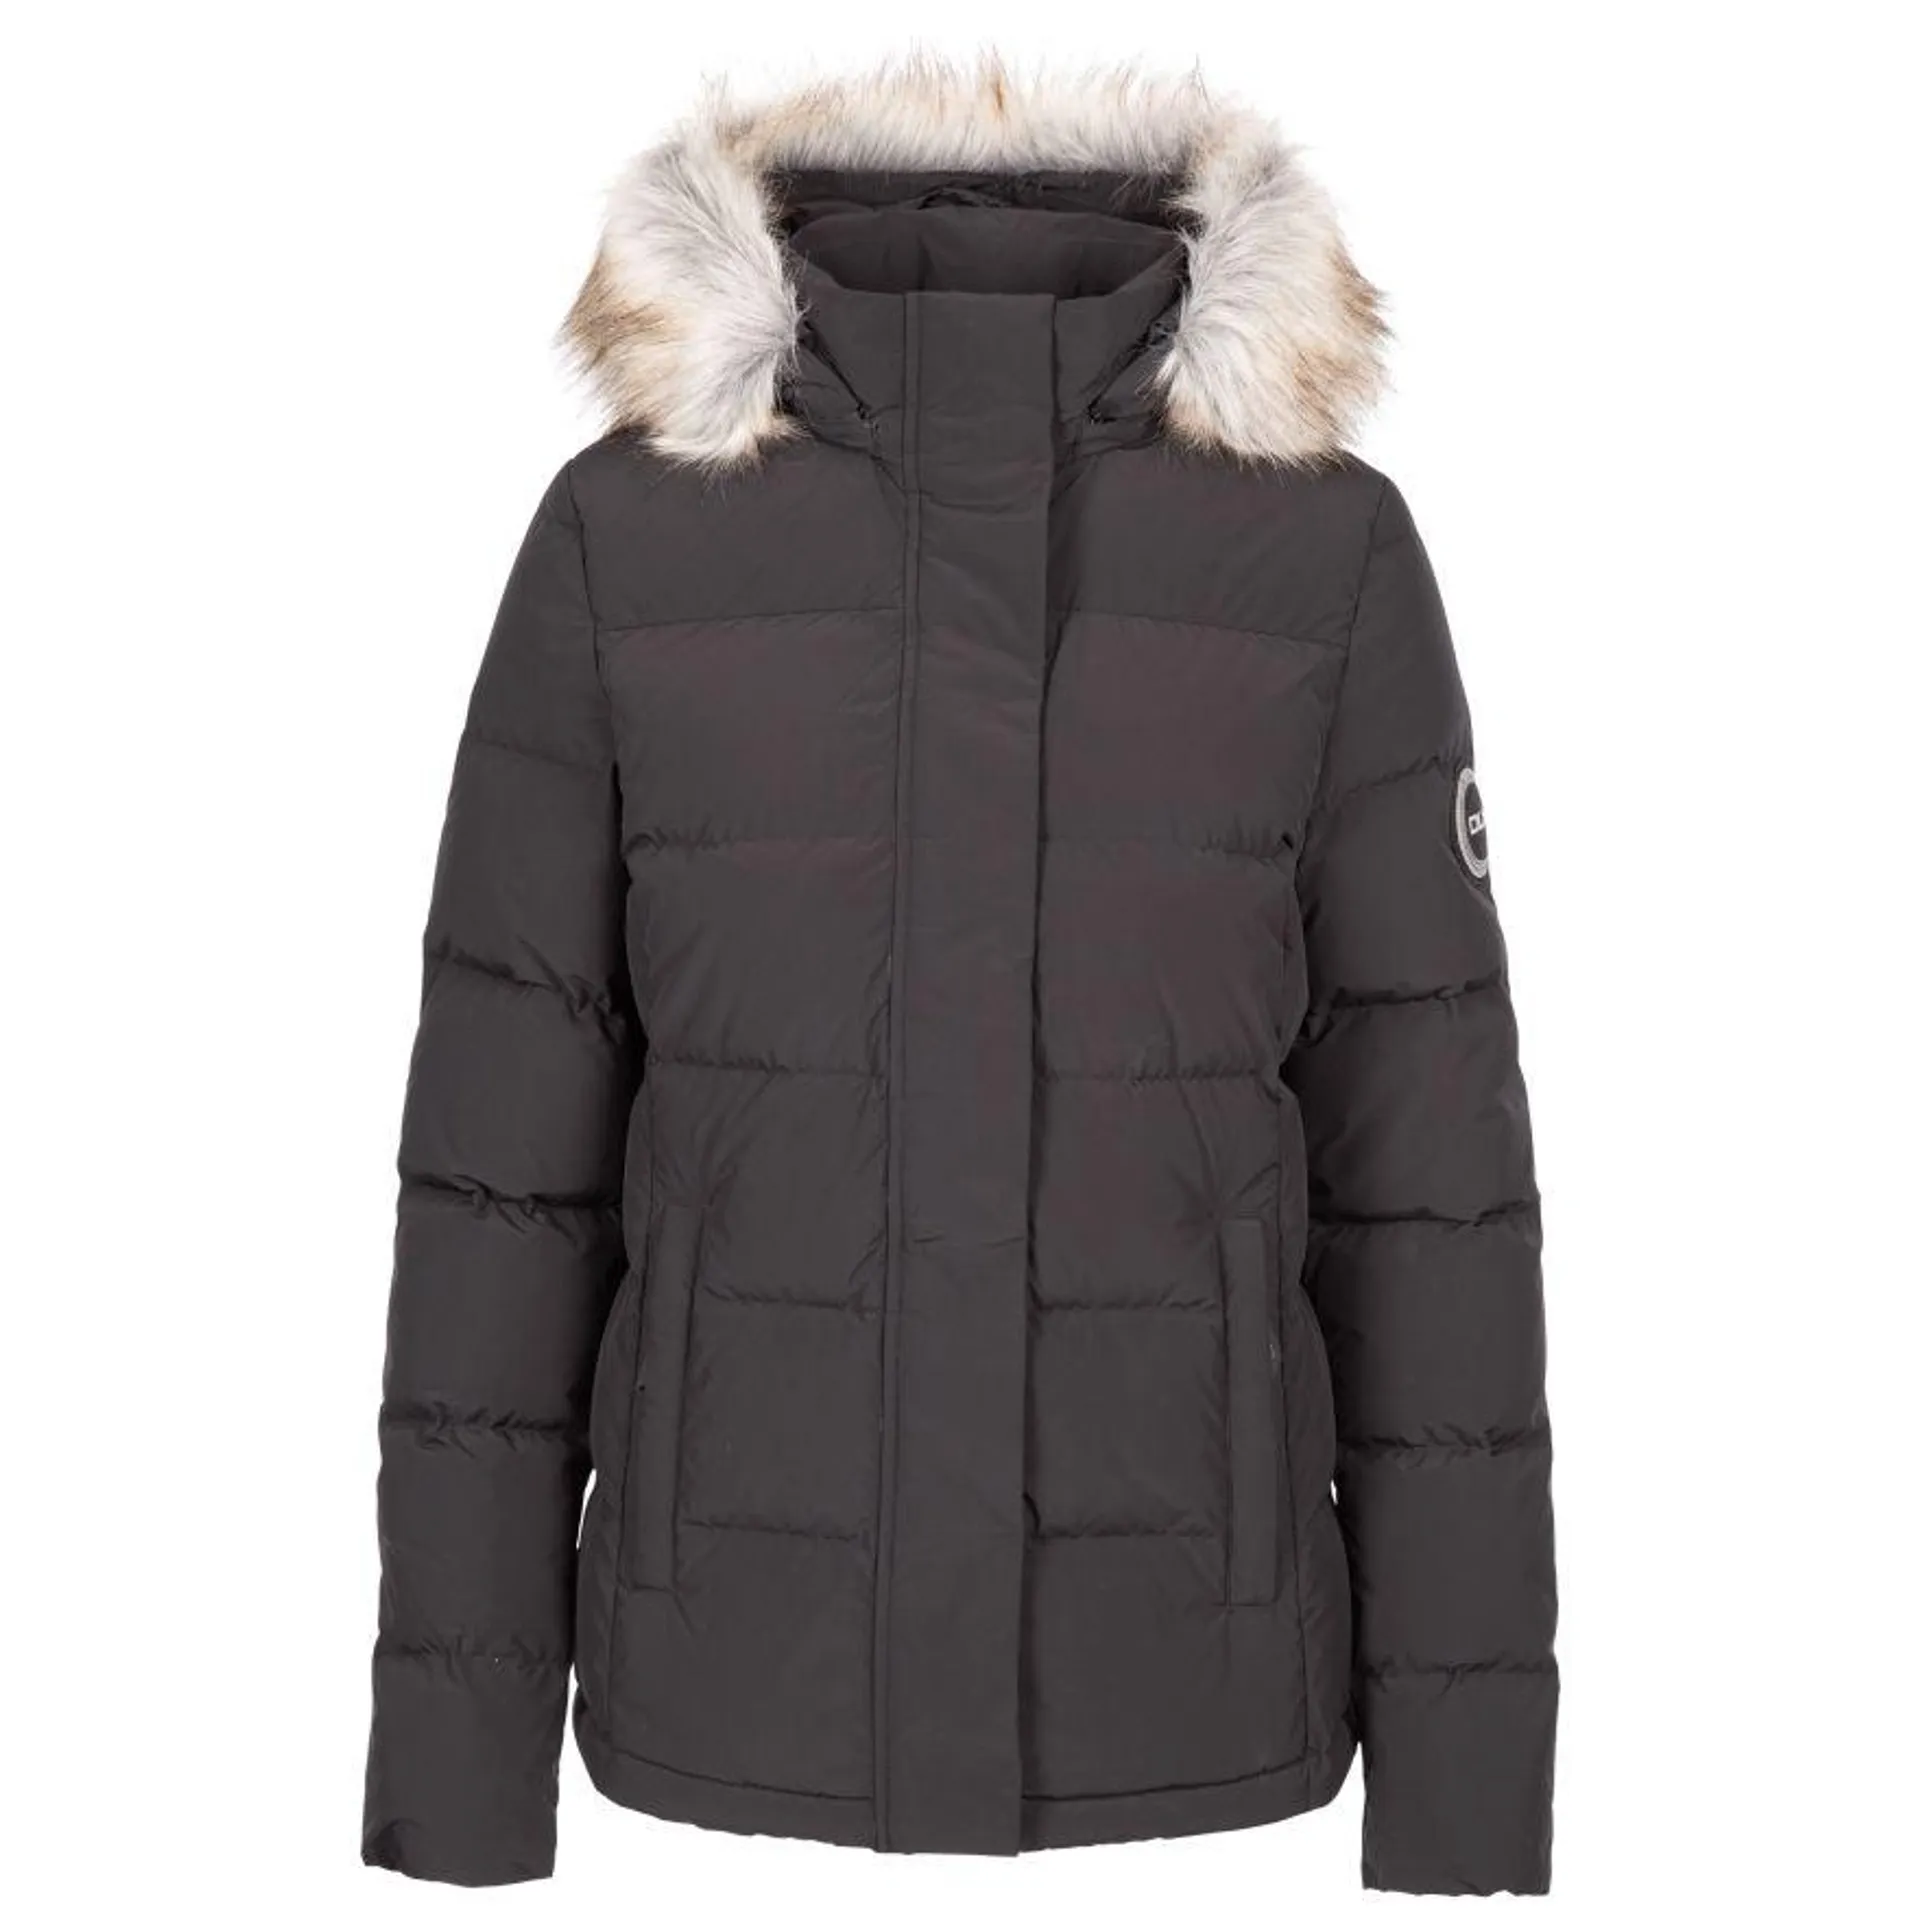 Womens DLX Down Jacket Composed